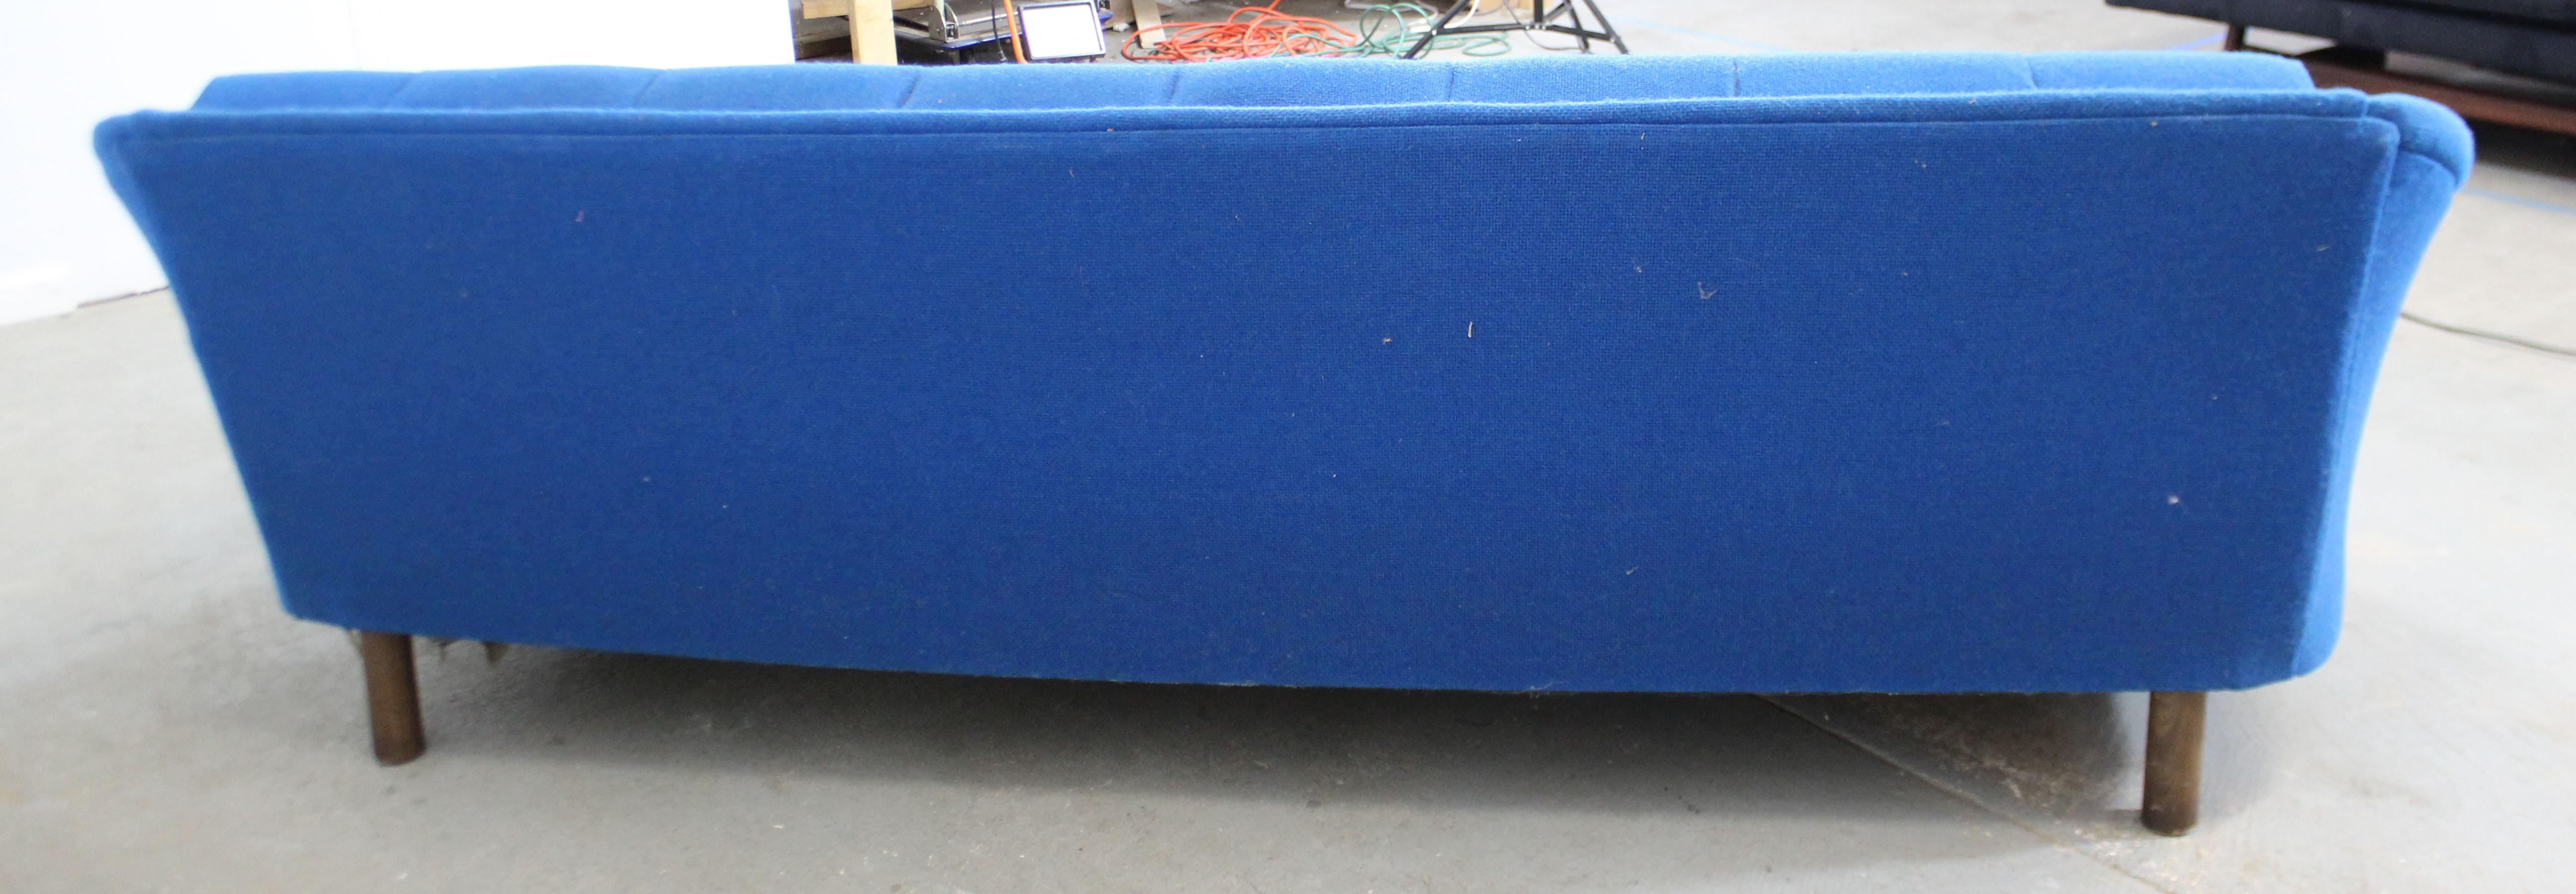 Mid-Century Modern Blue 3-Seat Sofa on Wood Base For Sale 1